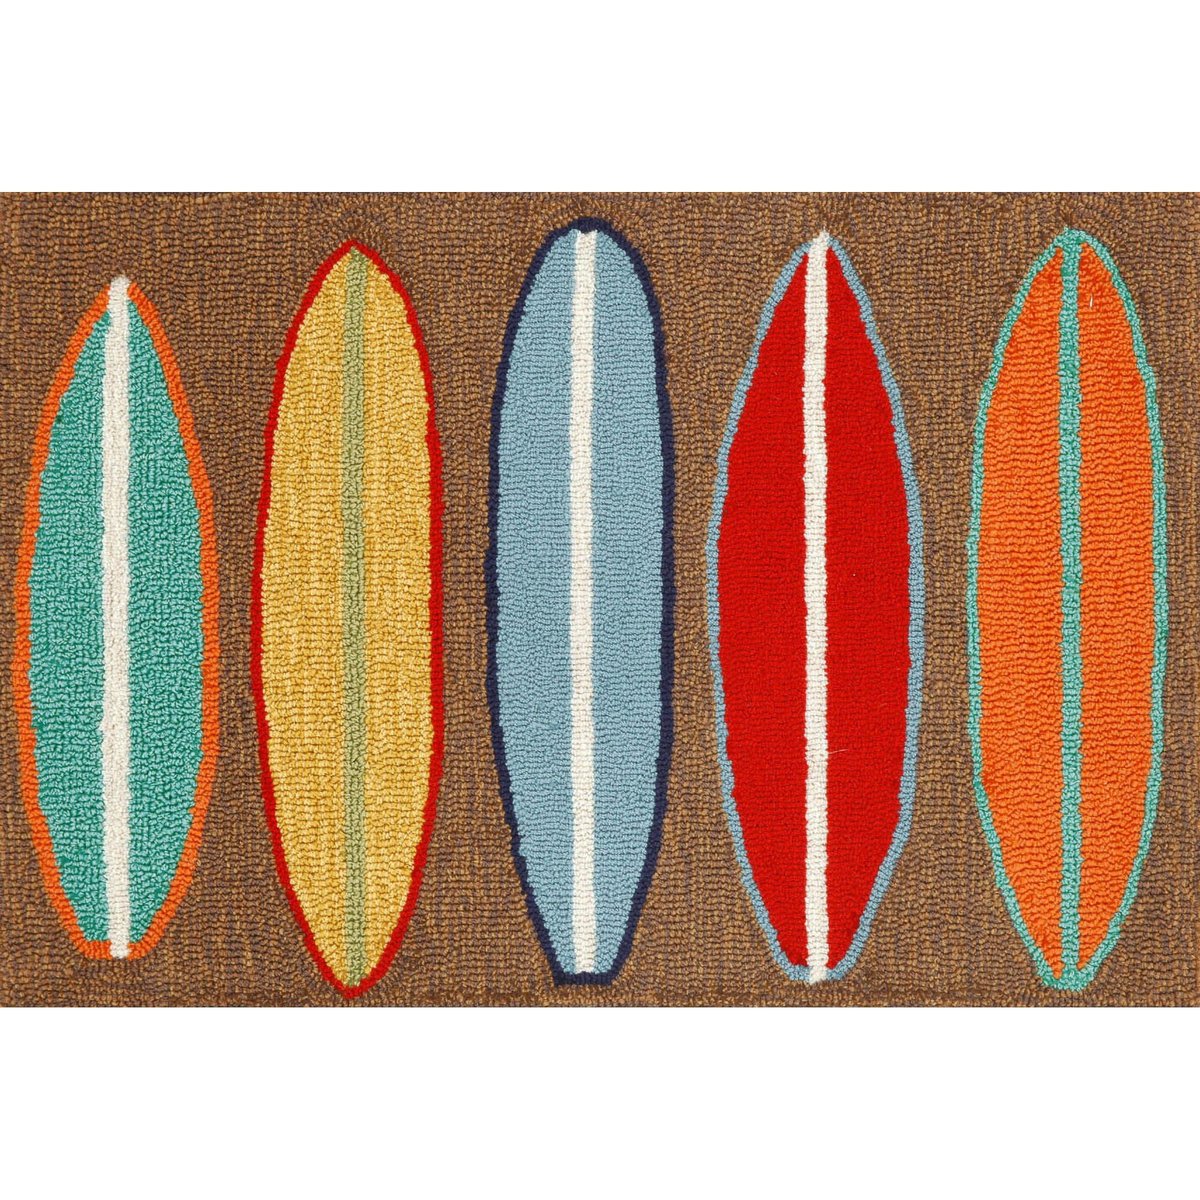 Outlook Dare Vi ses Liora Manne Front Porch Surfboards Rugs | Rugs Direct